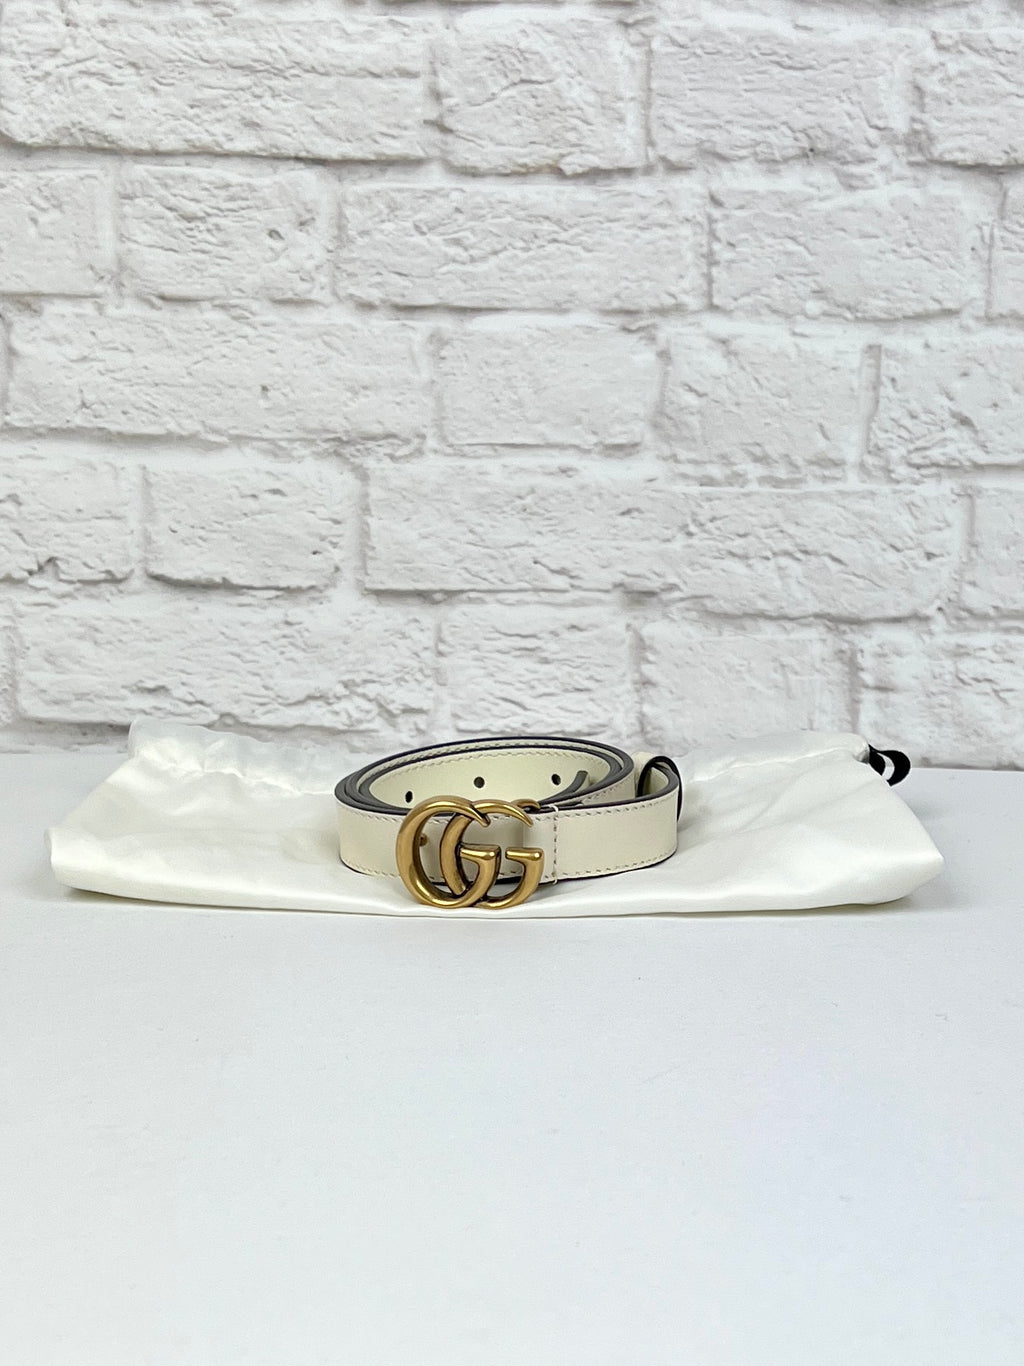 GUCCI GG Marmont leather belt, Ivory, Size 70-28 (US 2)